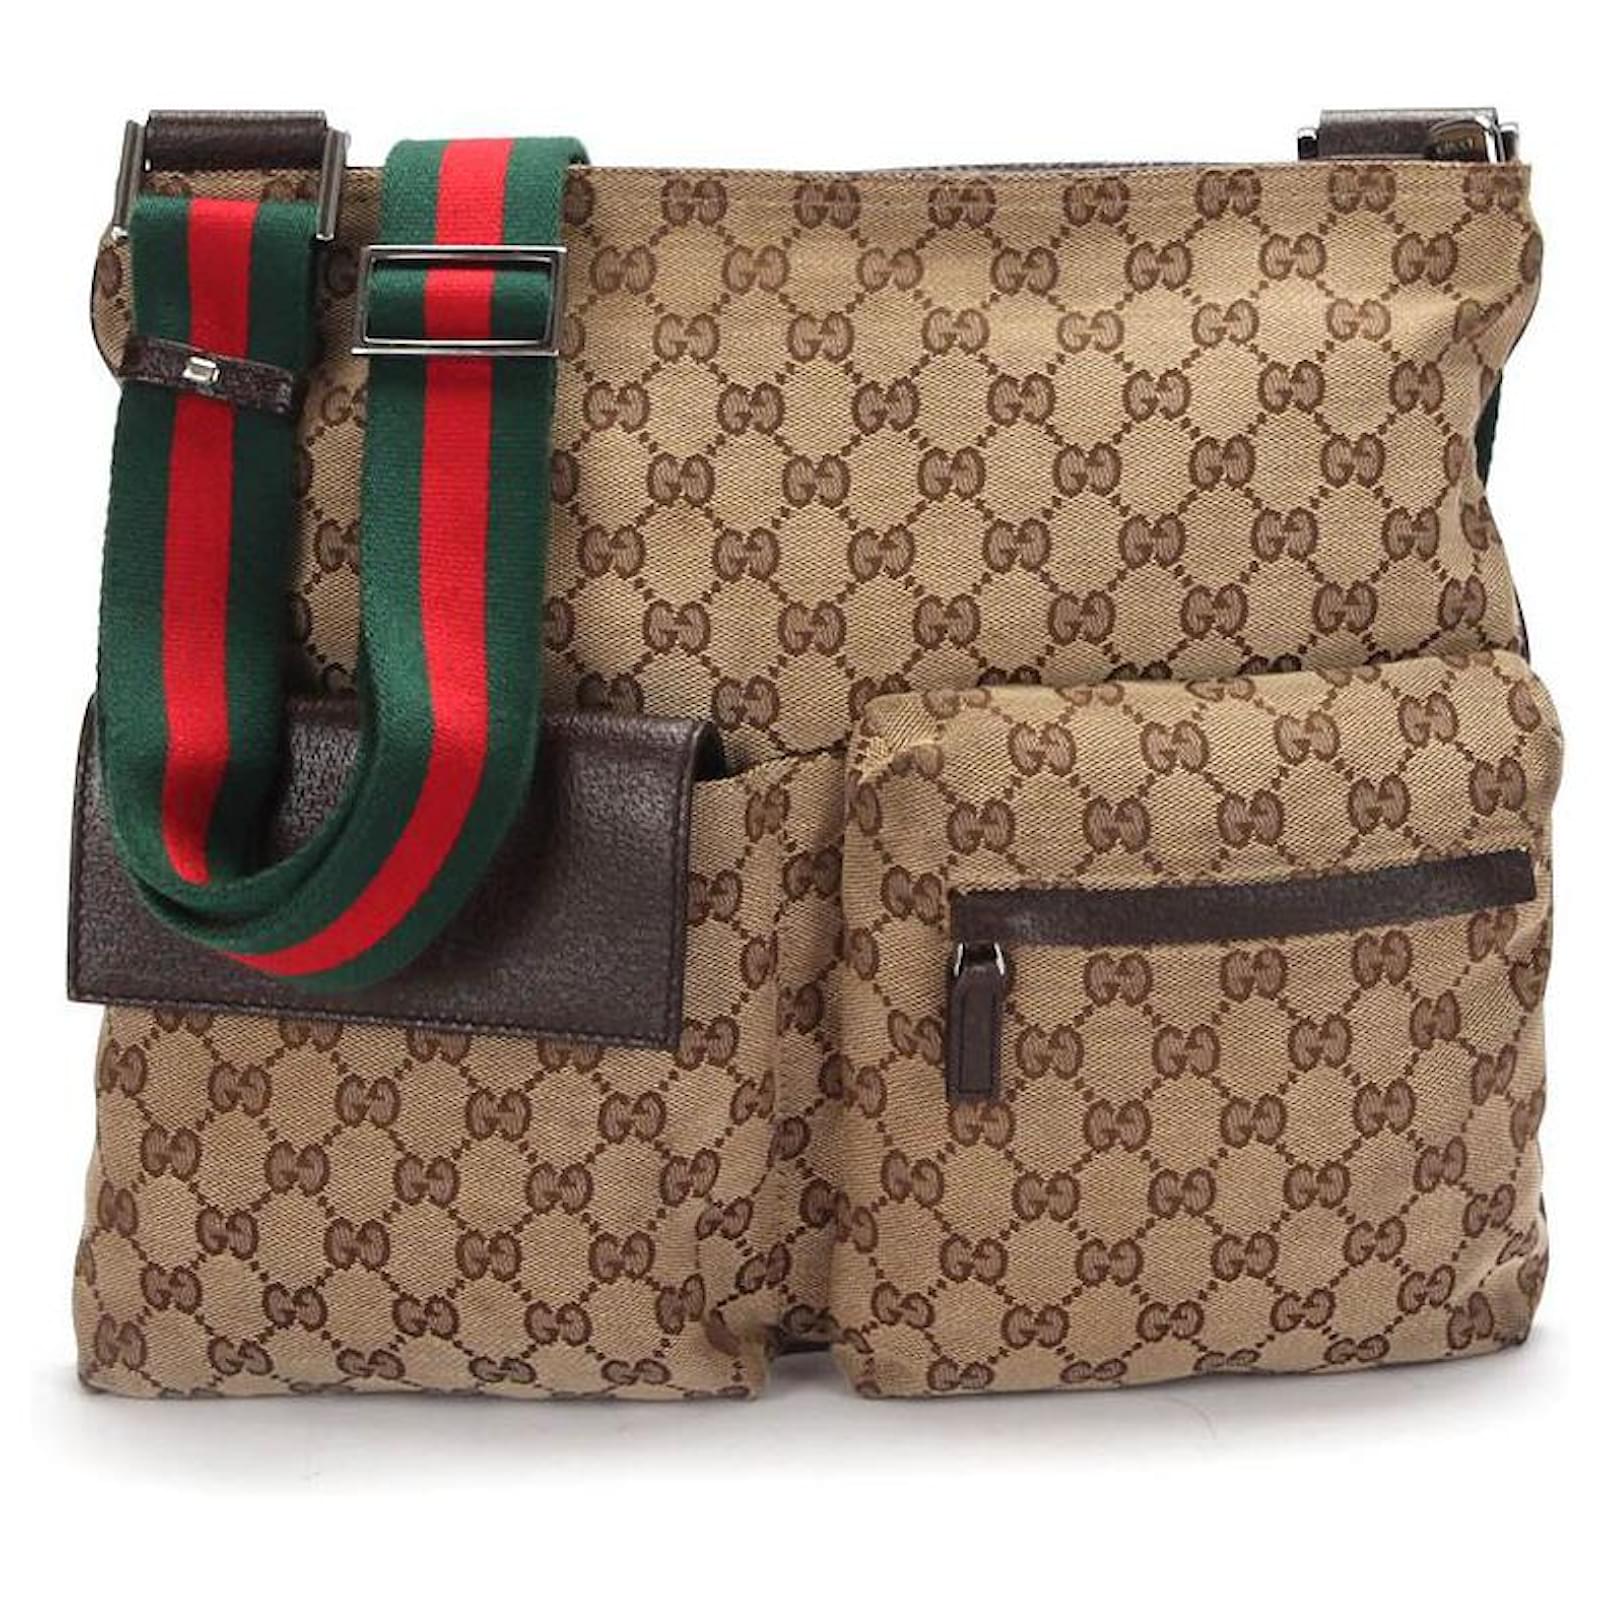 Gucci Jumbo Gg Canvas Messenger Bag in Brown for Men